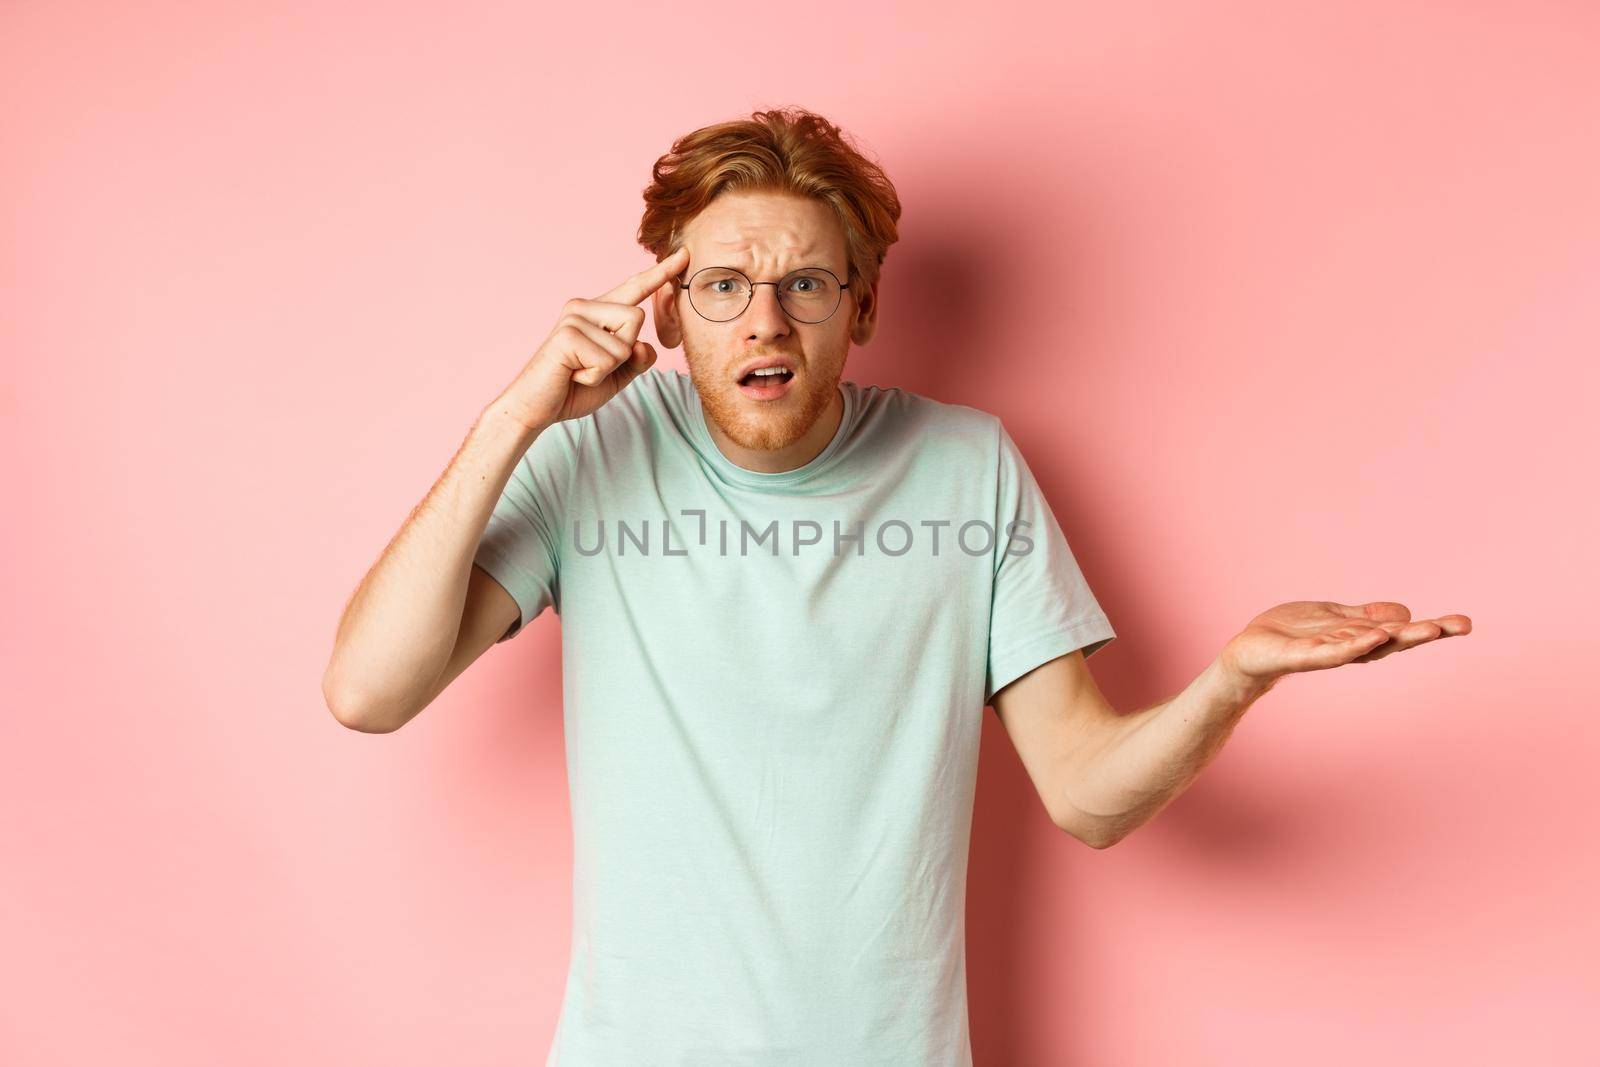 Annoyed redhead man scolding someone stupid, pointing finger at head and shrugging, standing over pink background.